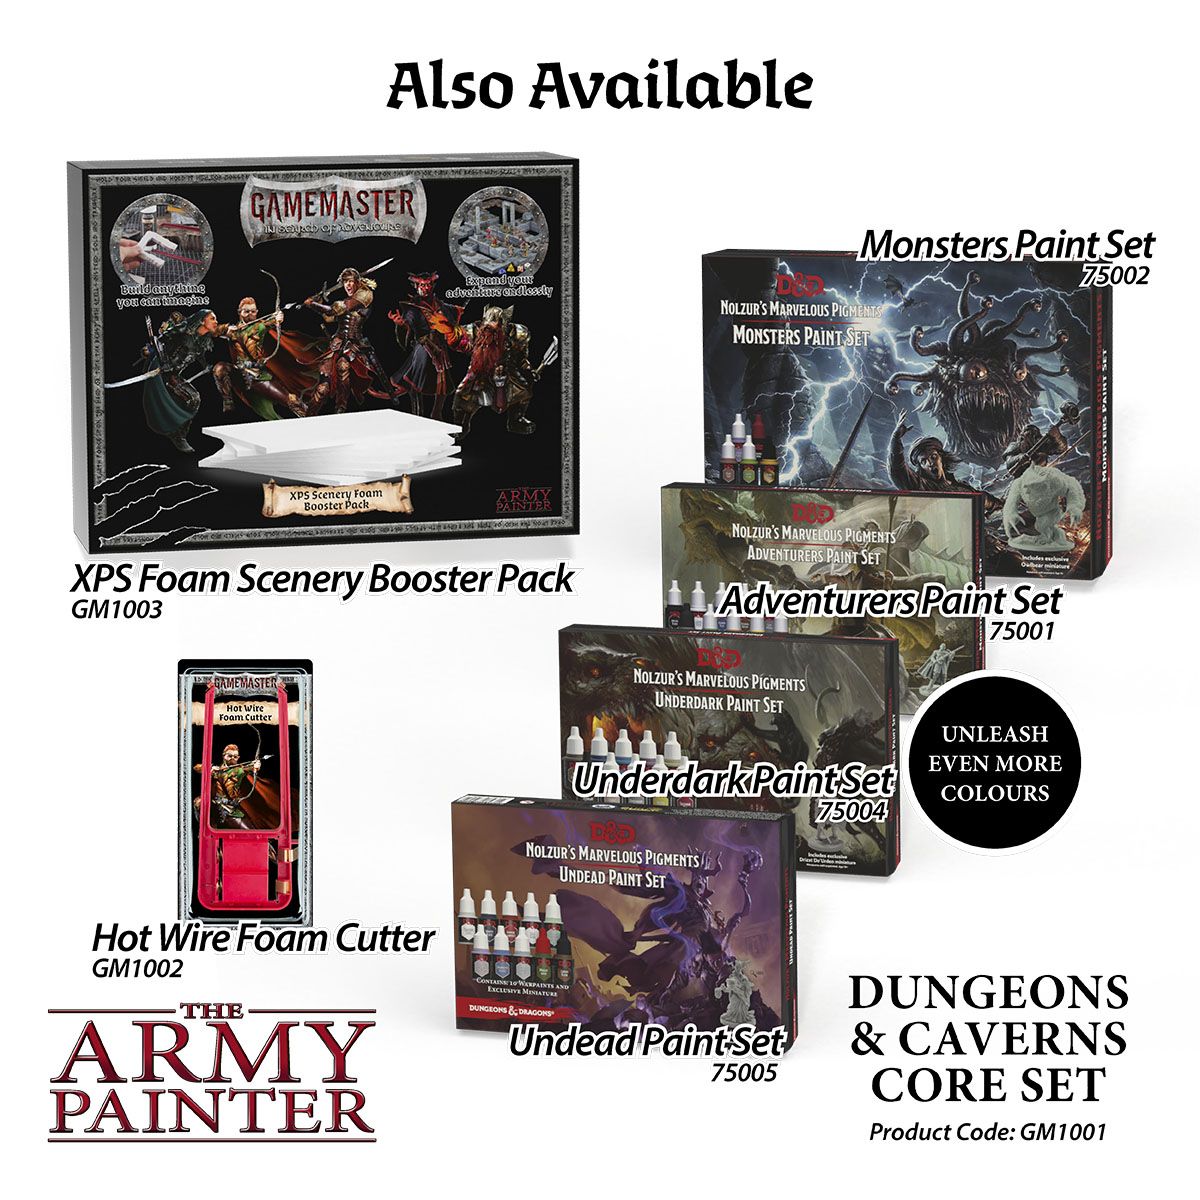 Gamemaster Dungeons & Caverns Core Set - Loaded Dice